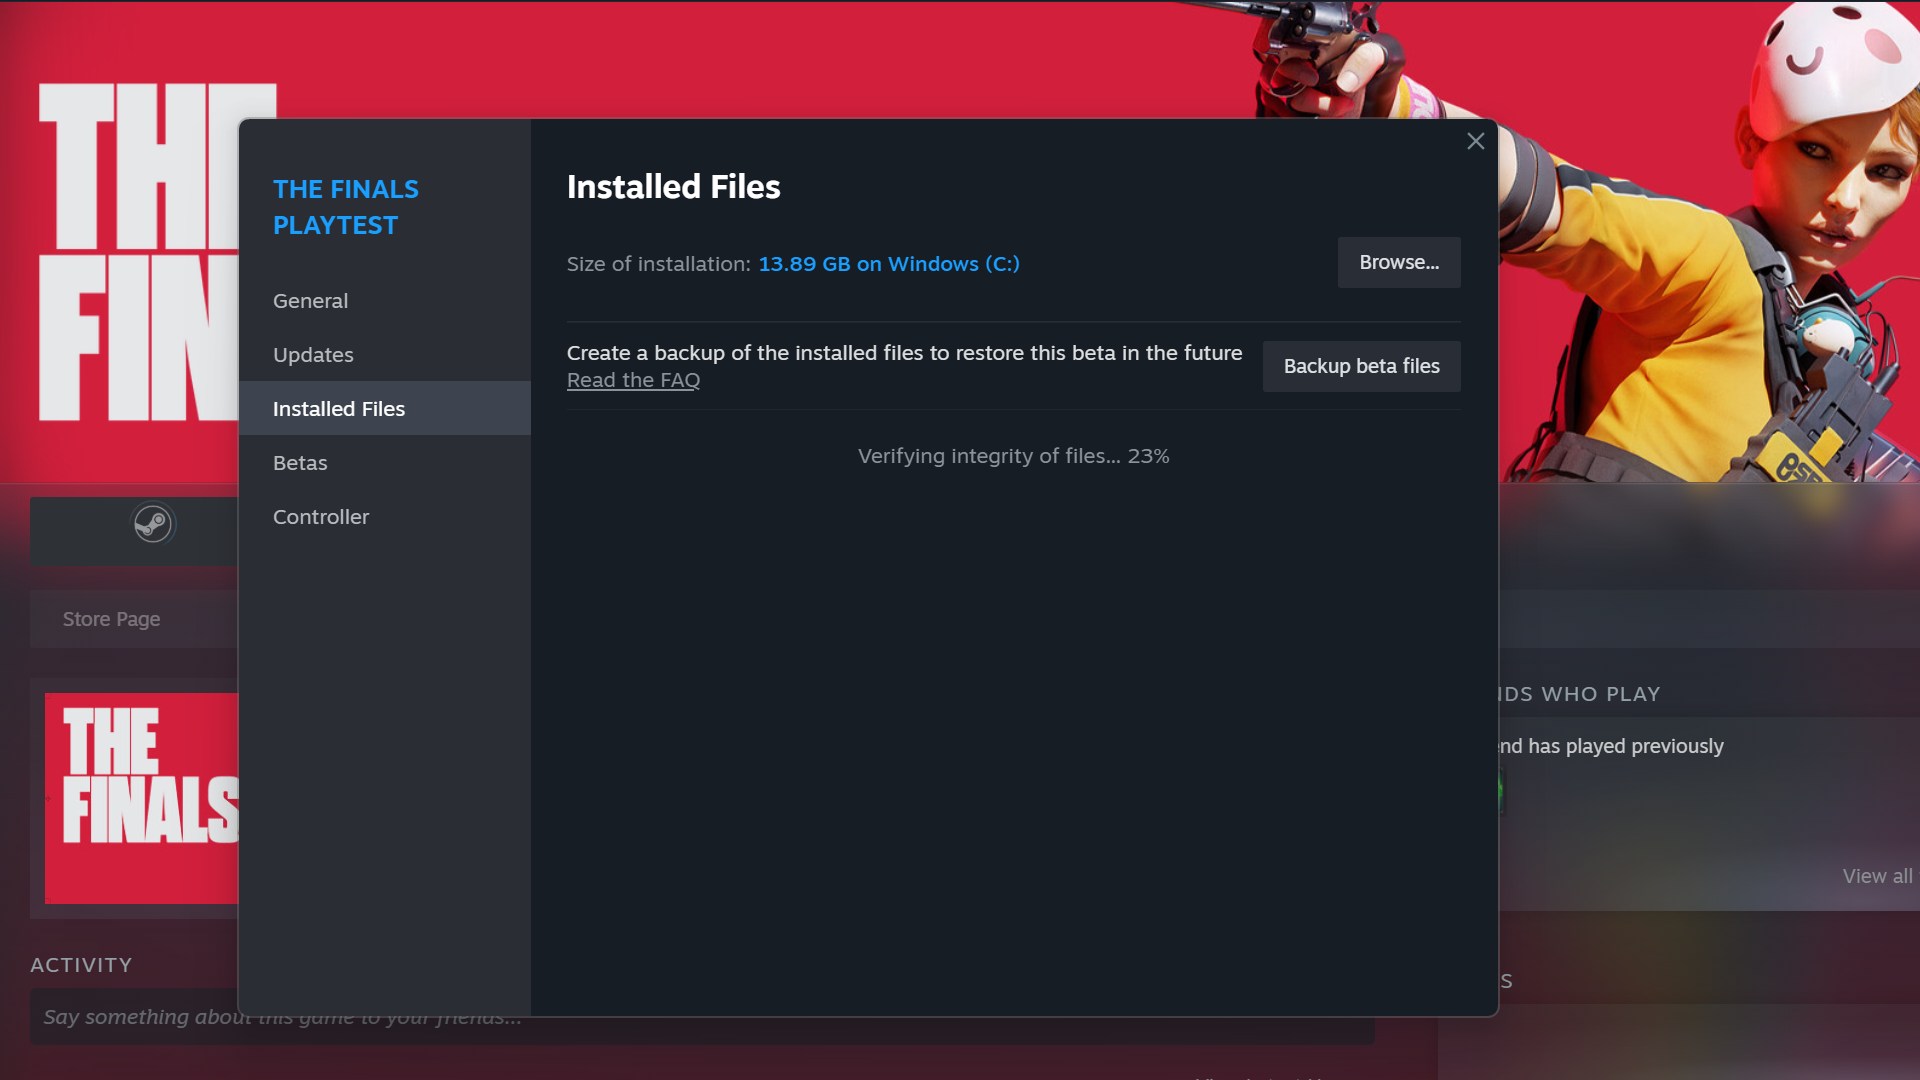 The installed files section for The Finals on Steam